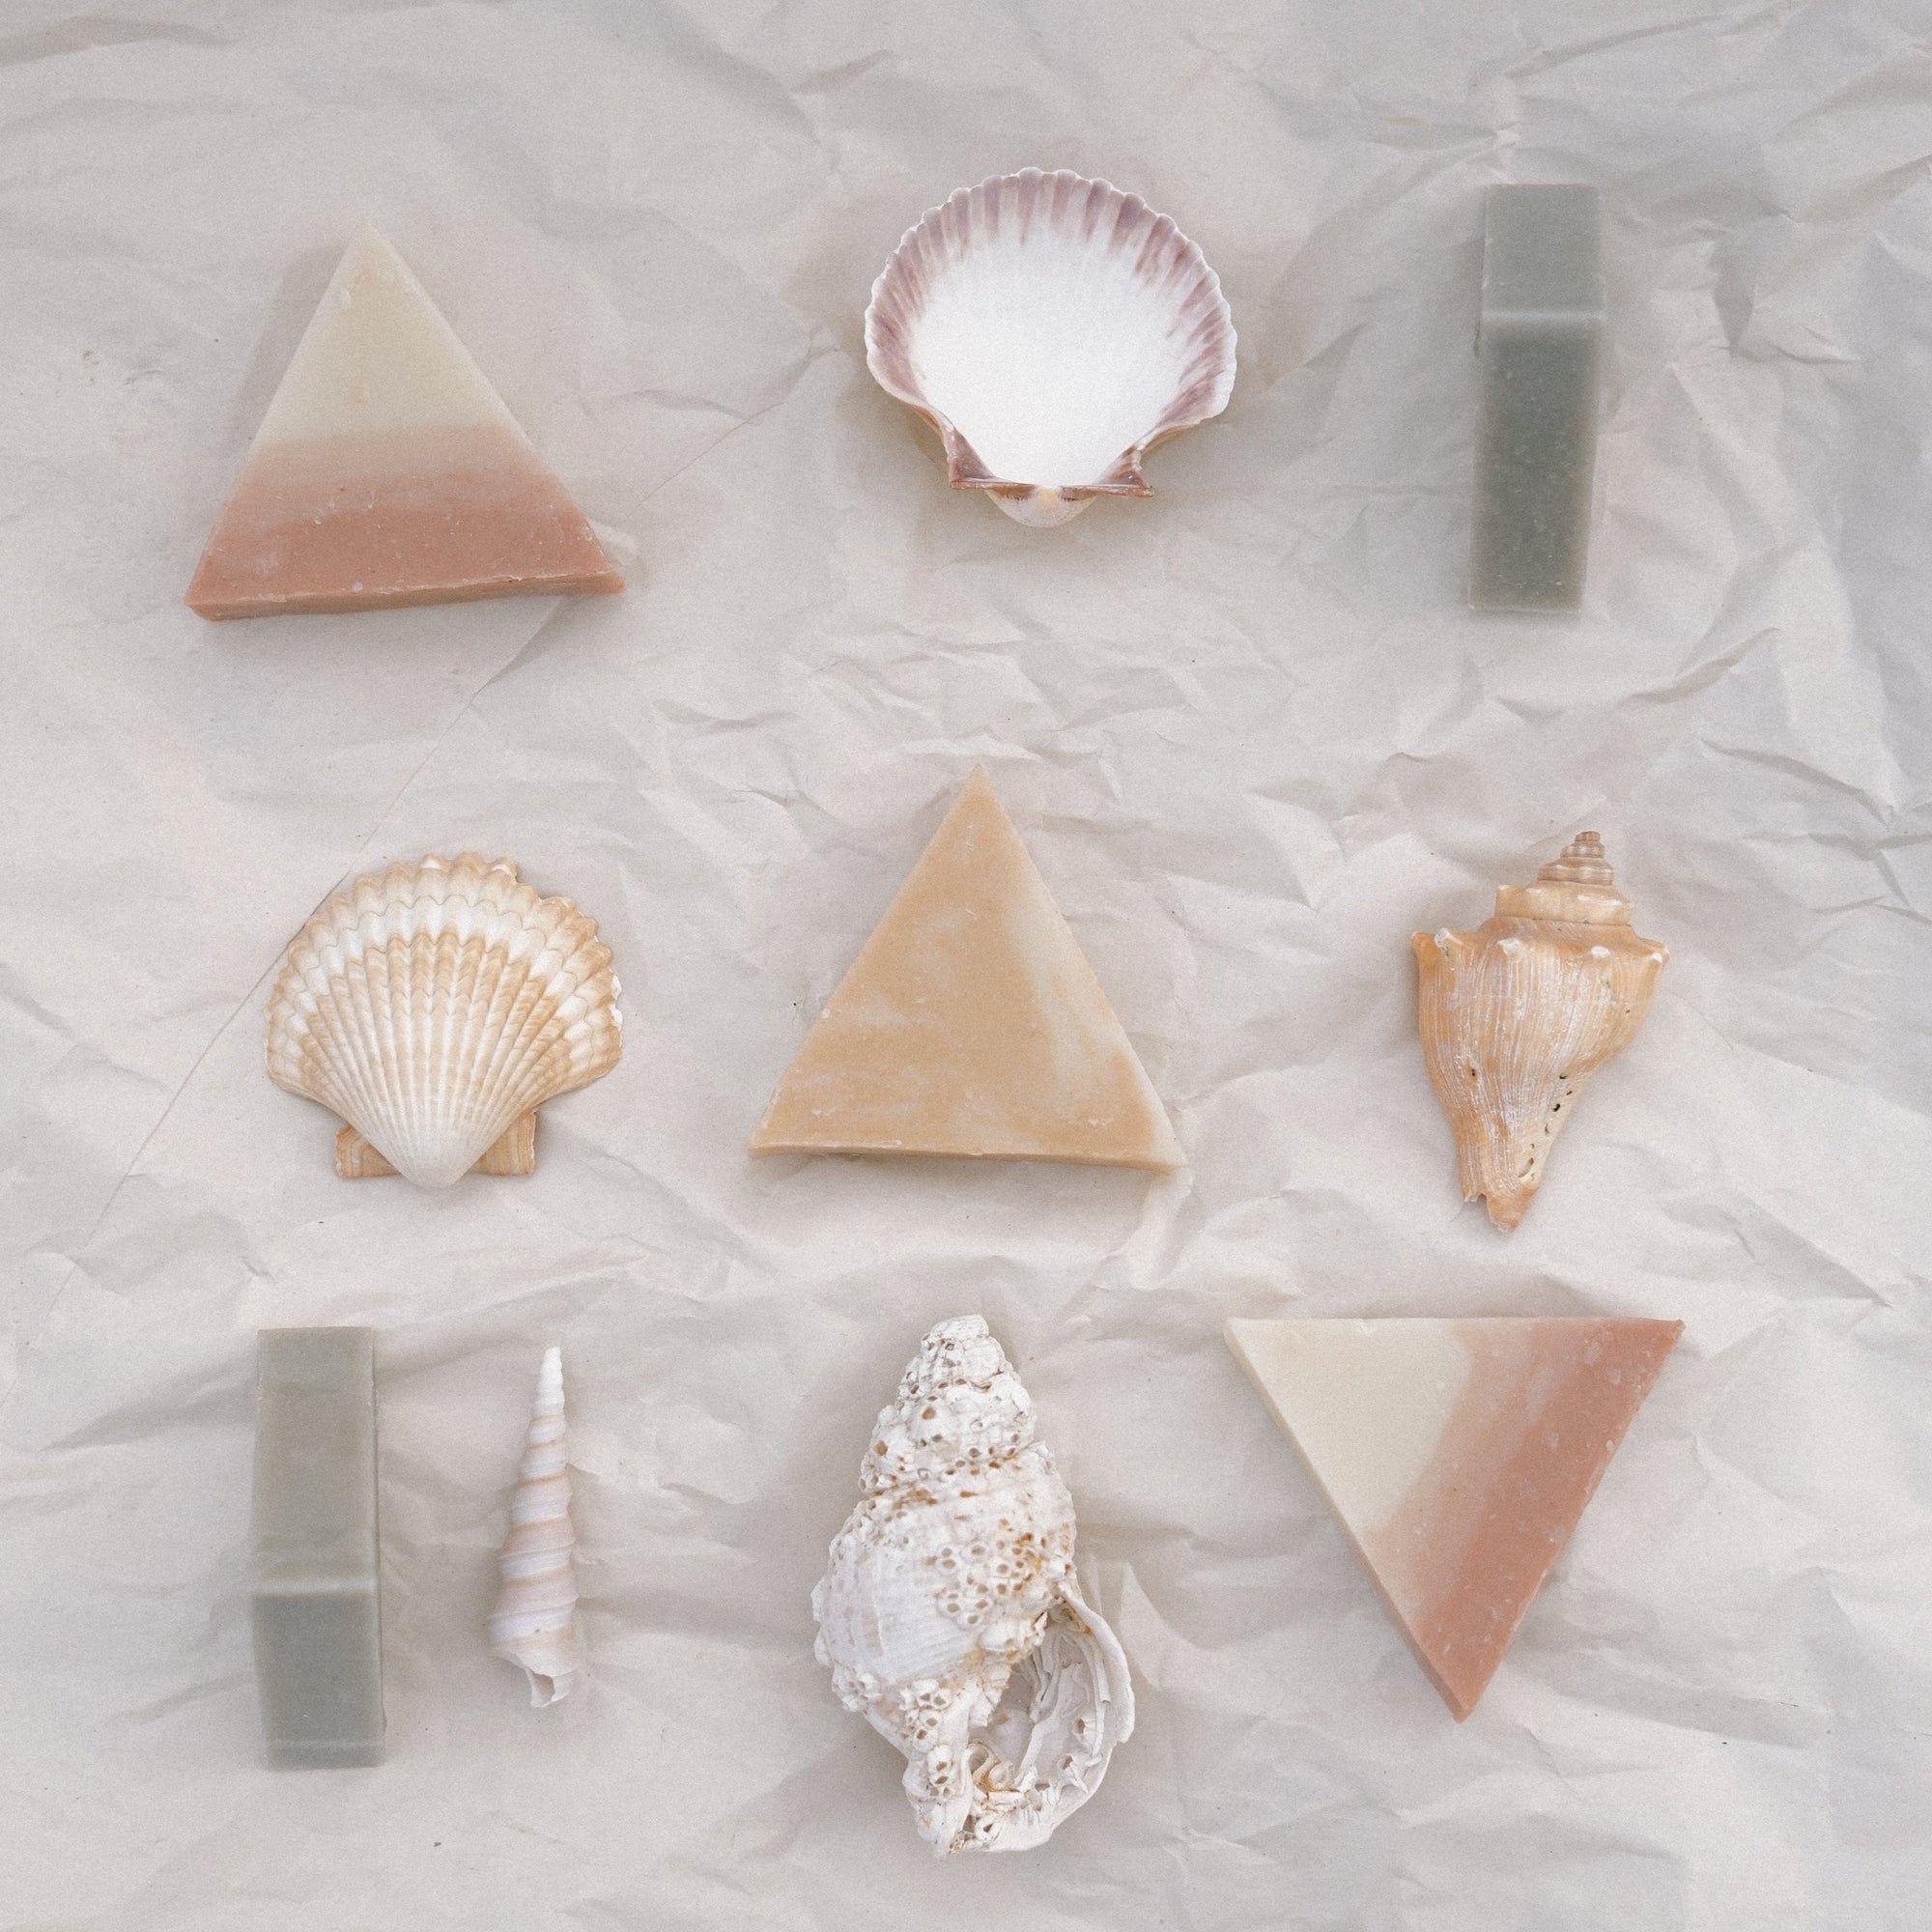 Five soaps and five seashells laid out in a square against white crinkled paper